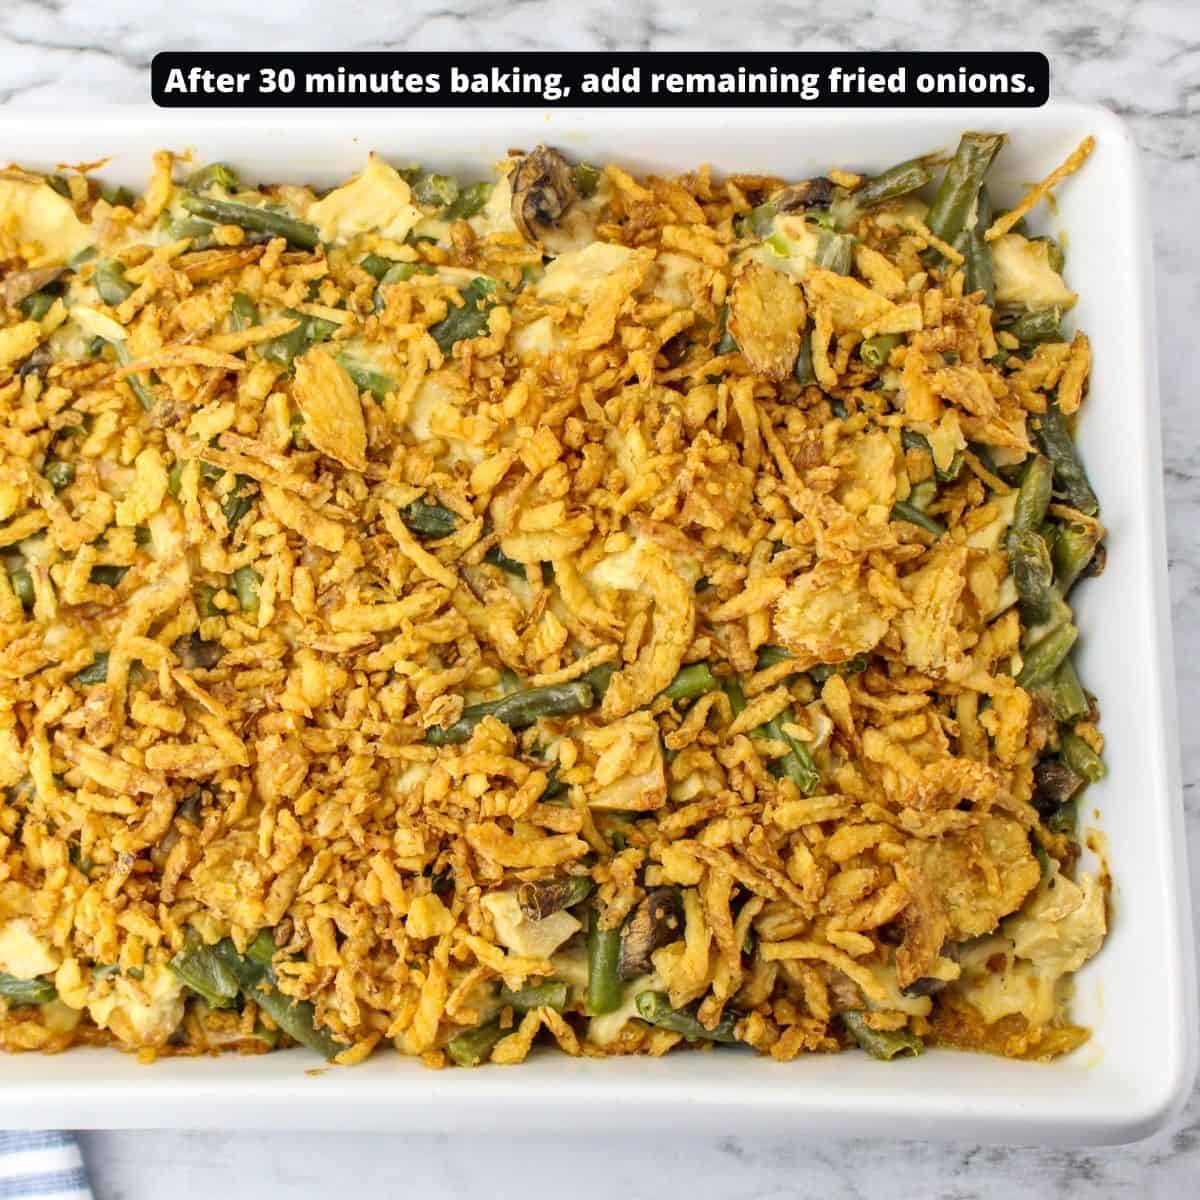 A casserole with green beans, chicken, and topped with fried onions.